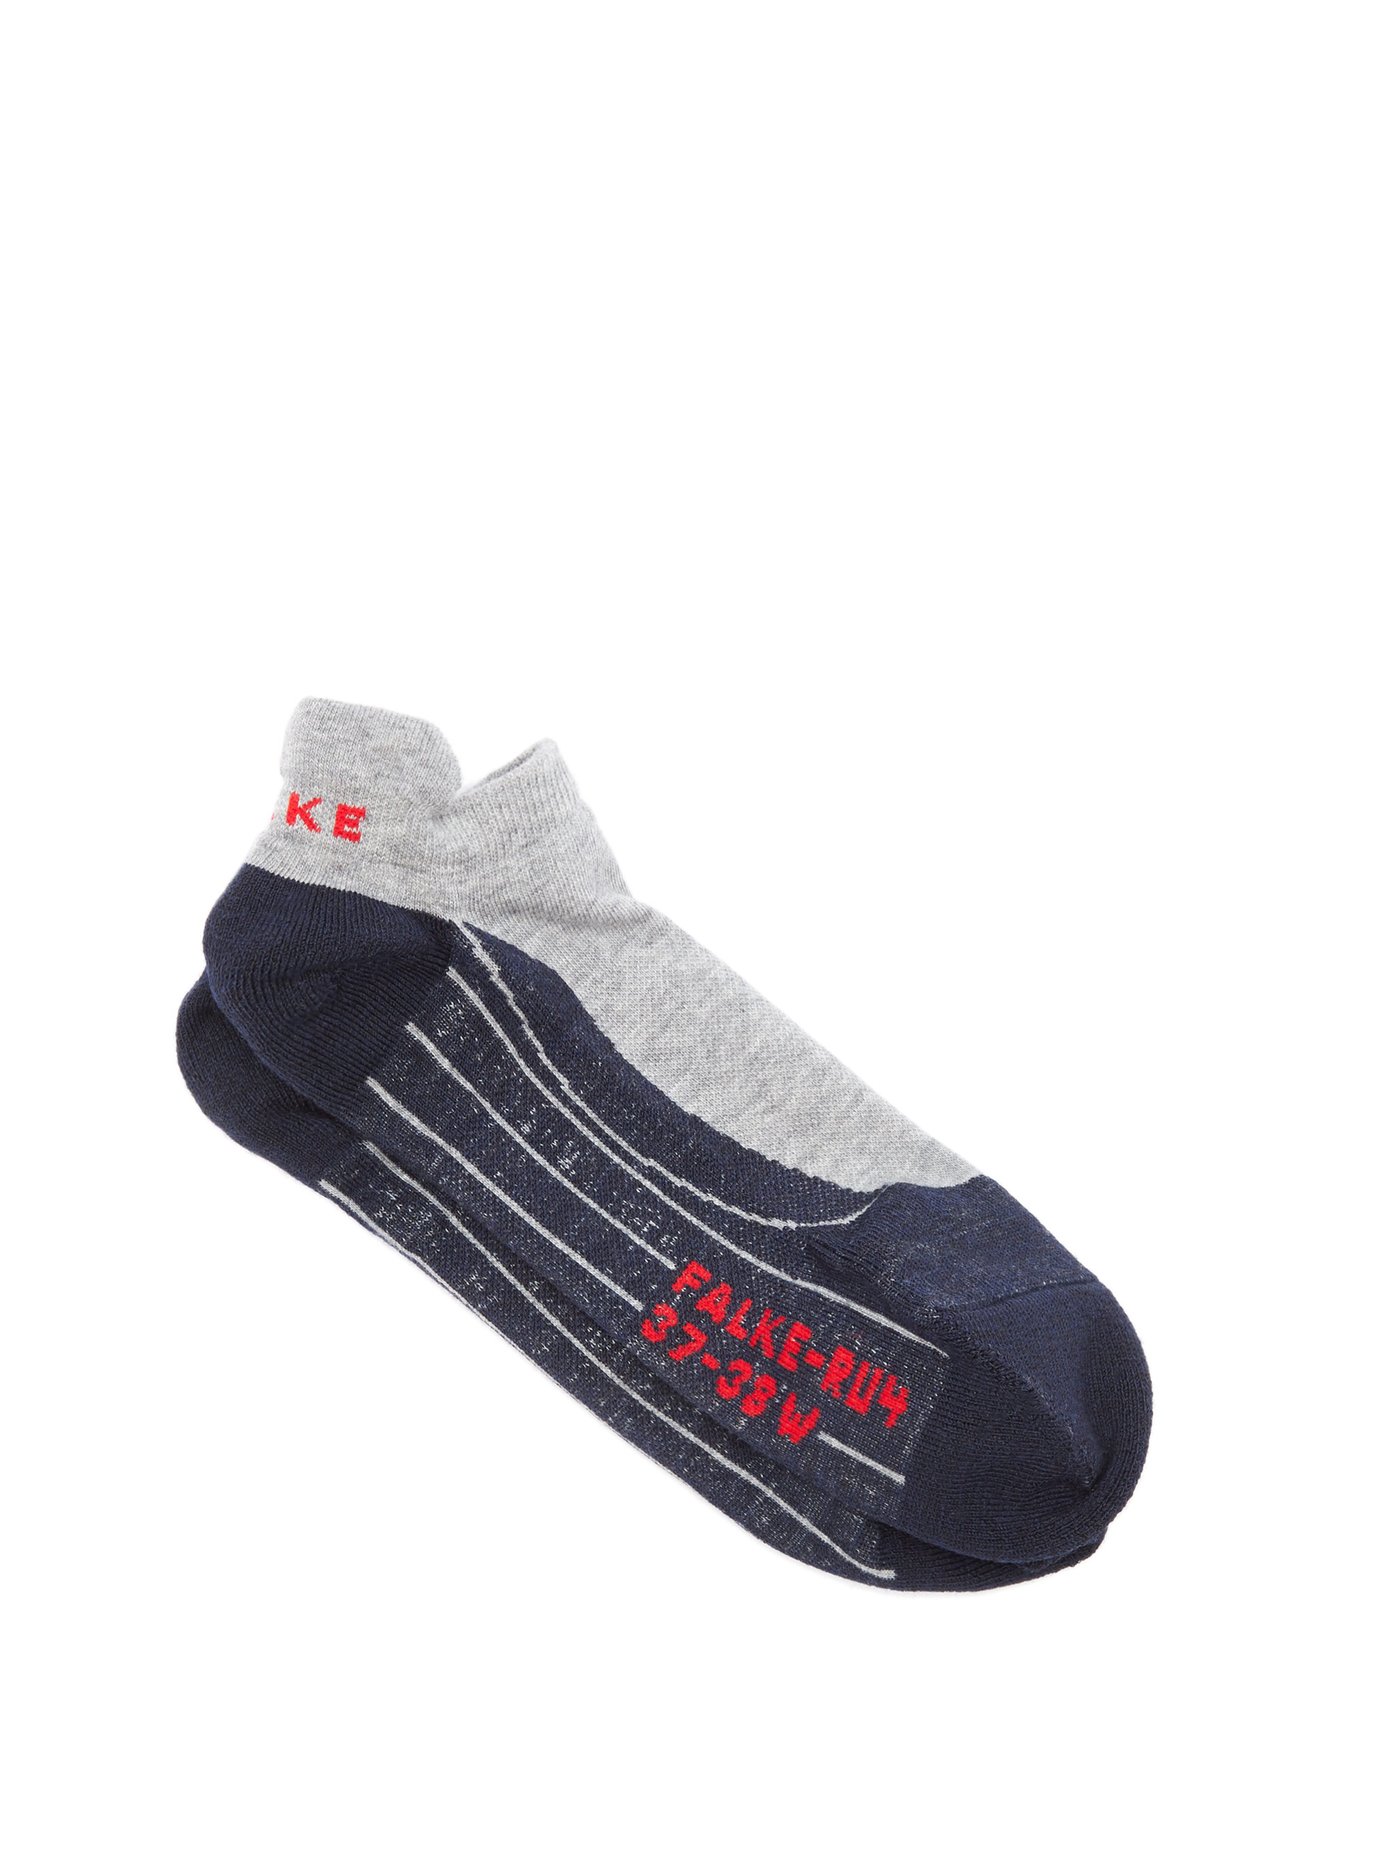 RU4 jersey invisible trainer socks 